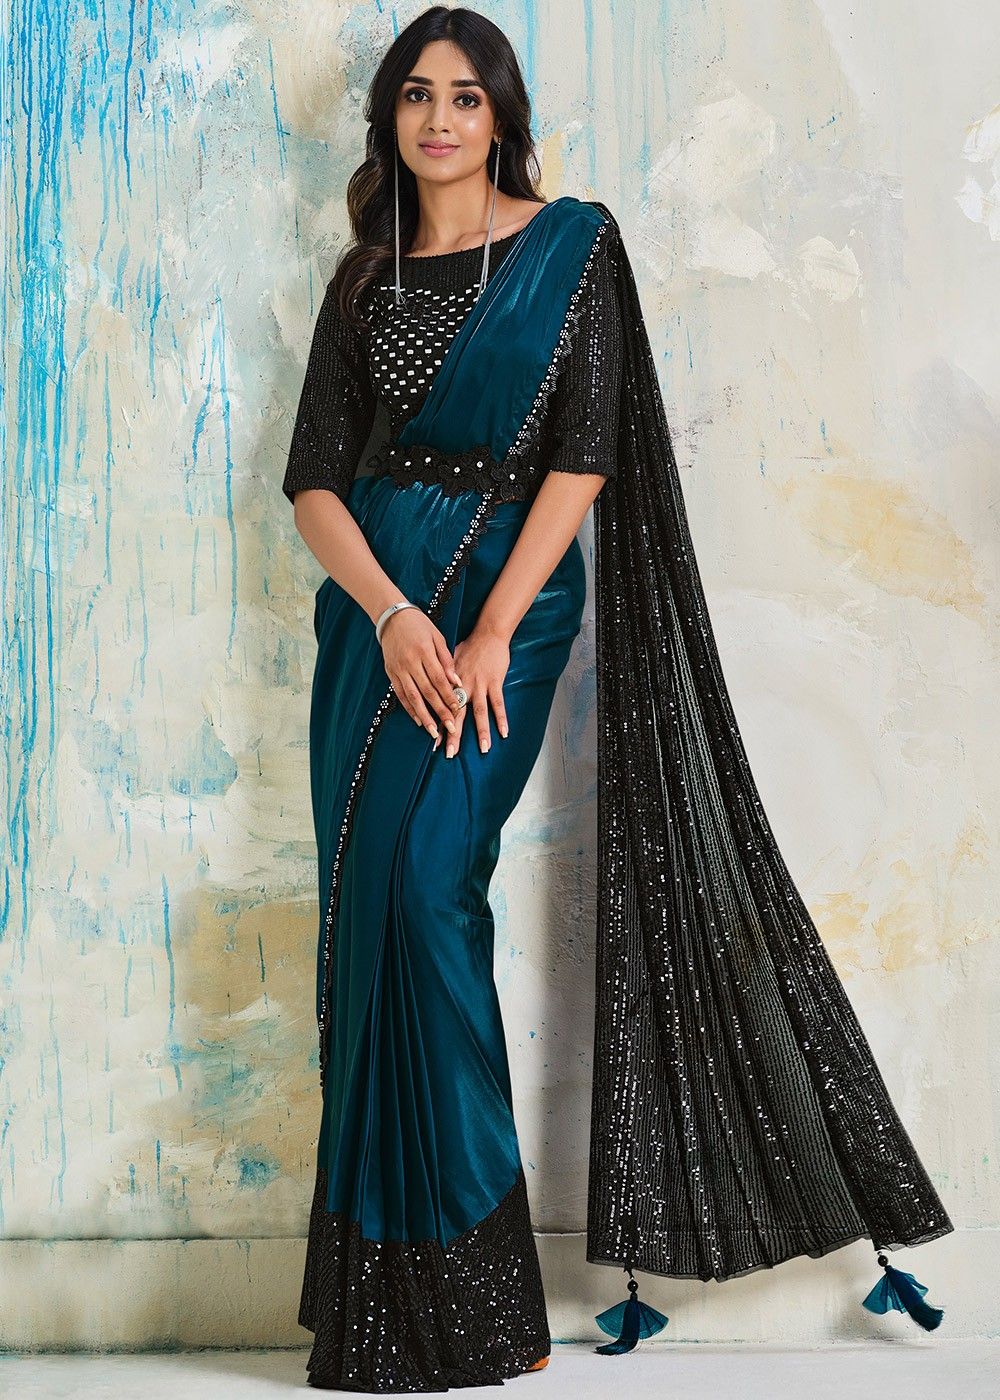 Buy Anusuya Saree Embellished, Dyed Bollywood Georgette, Chiffon Light Blue  Sarees Online @ Best Price In India | Flipkart.com